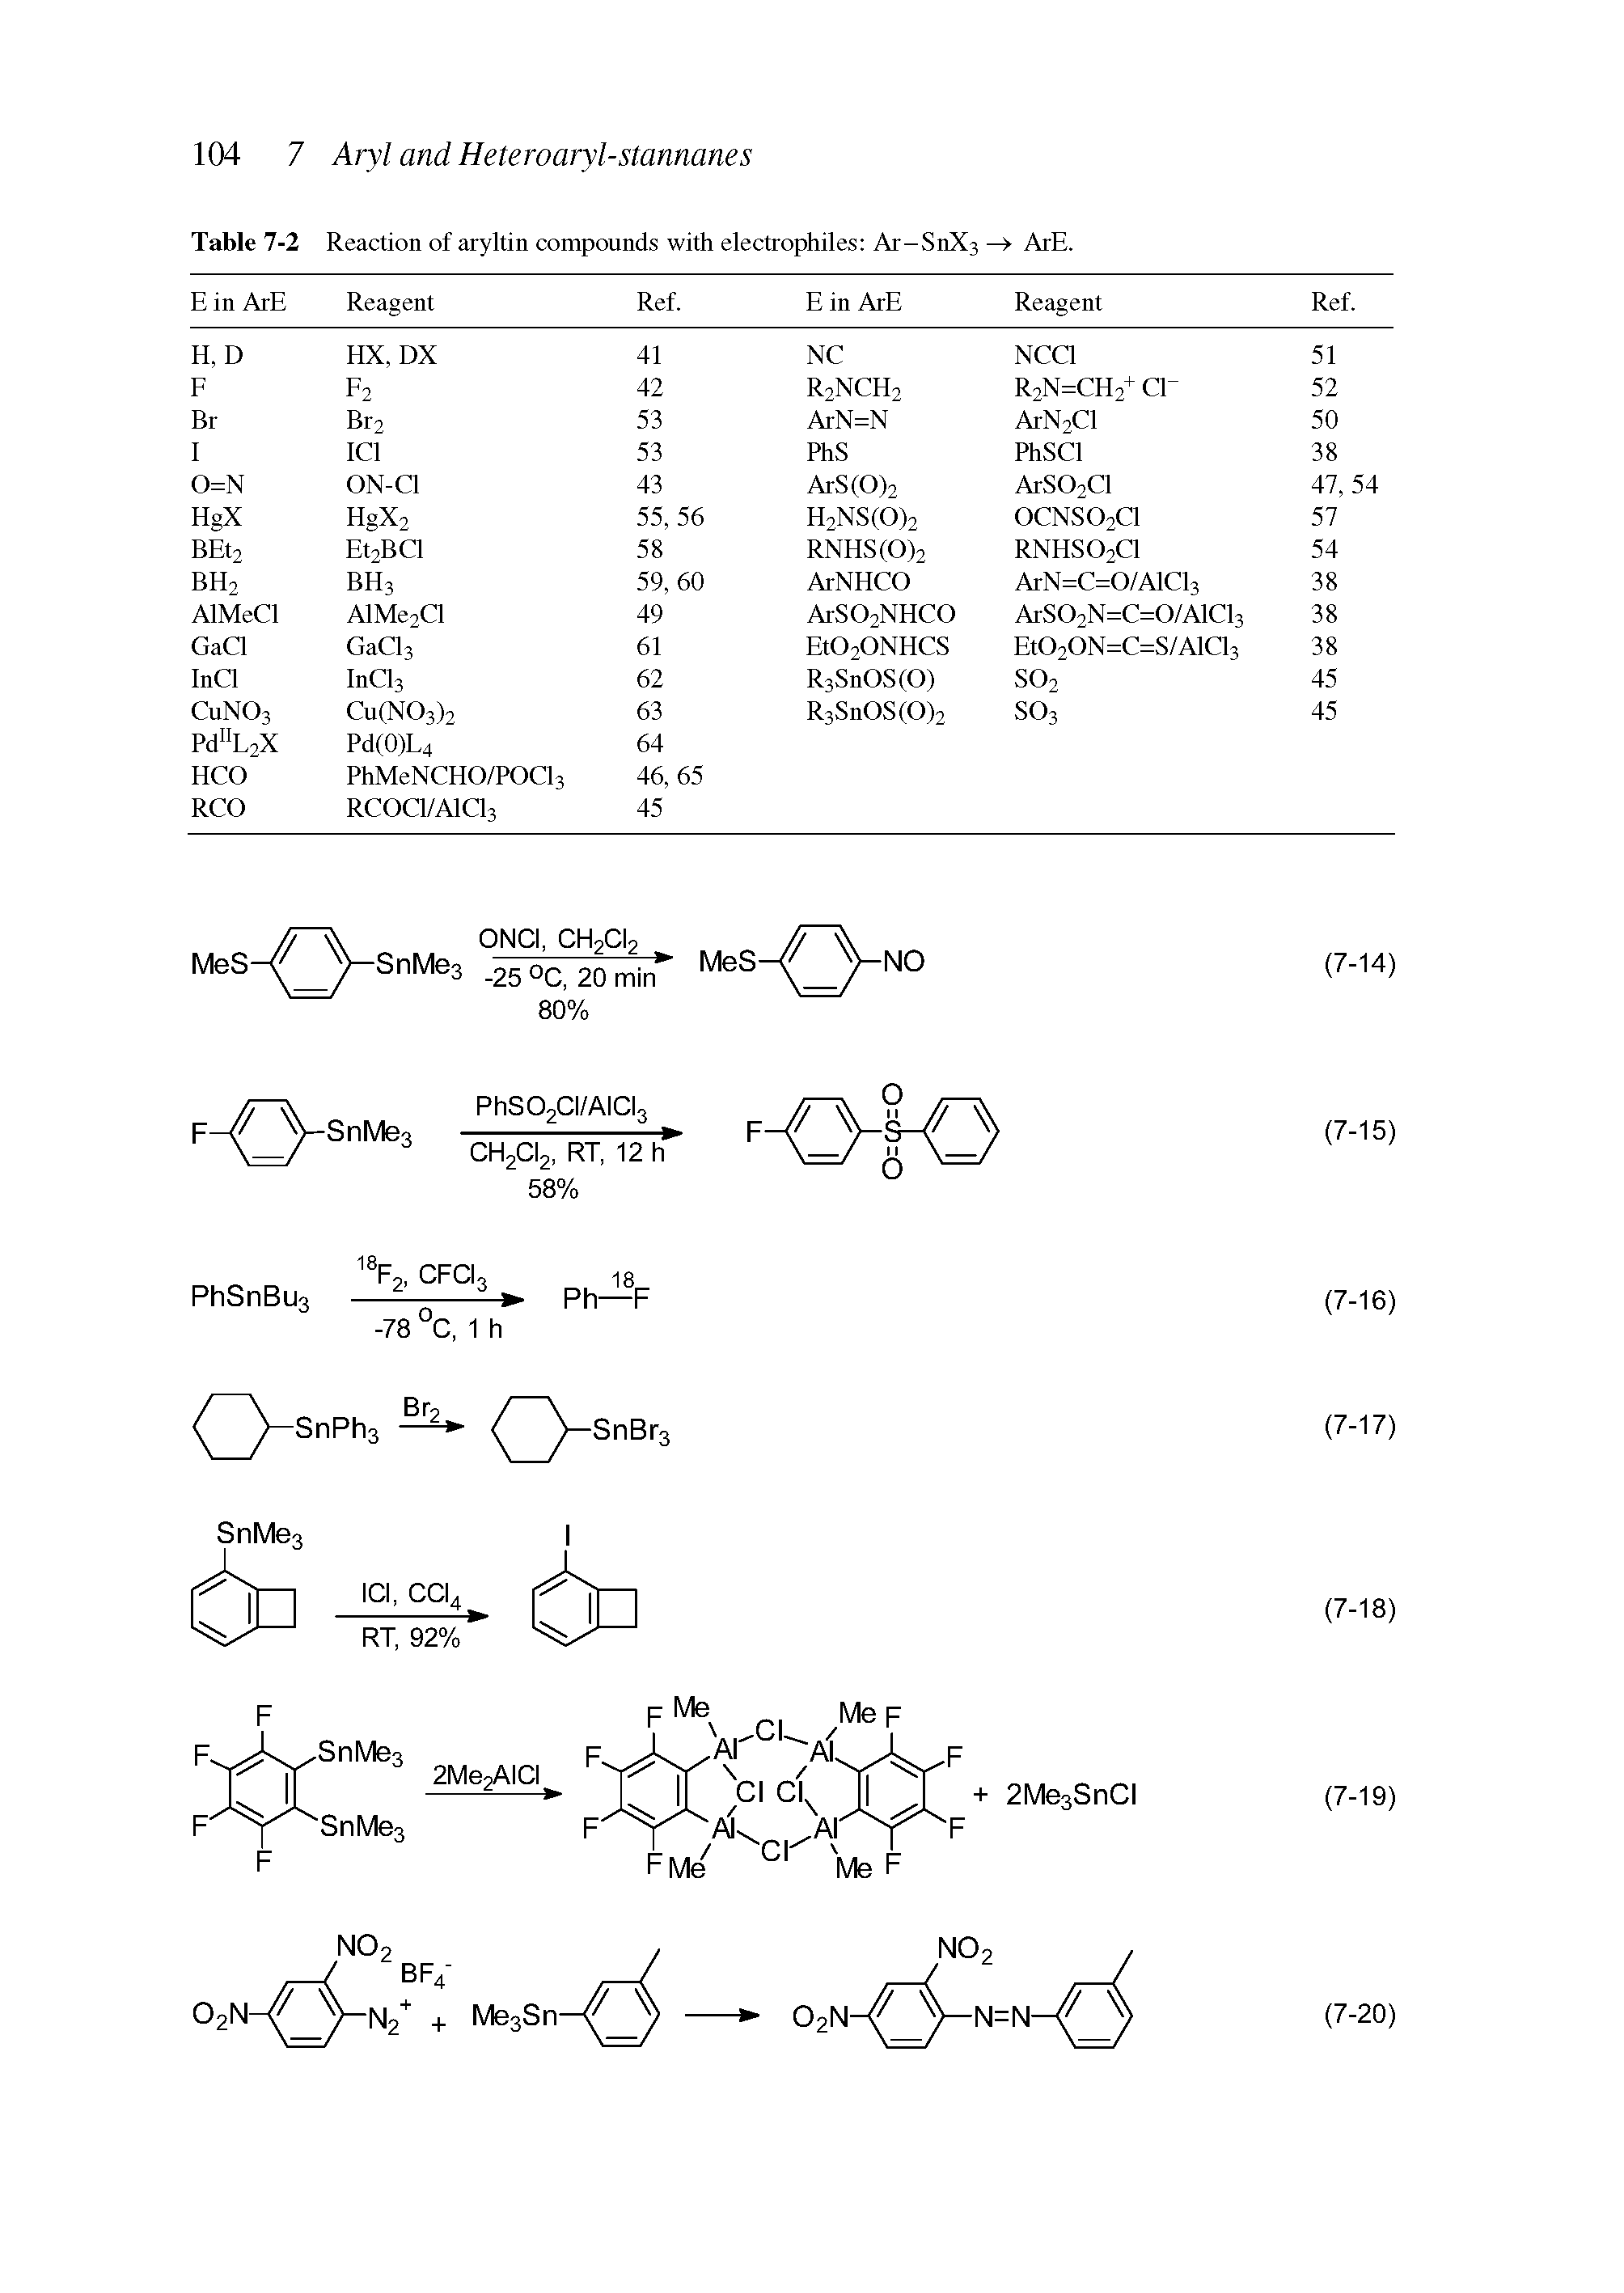 Table 7-2 Reaction of aryltin compounds with electrophiles Ar-SnX3 —> ArE.